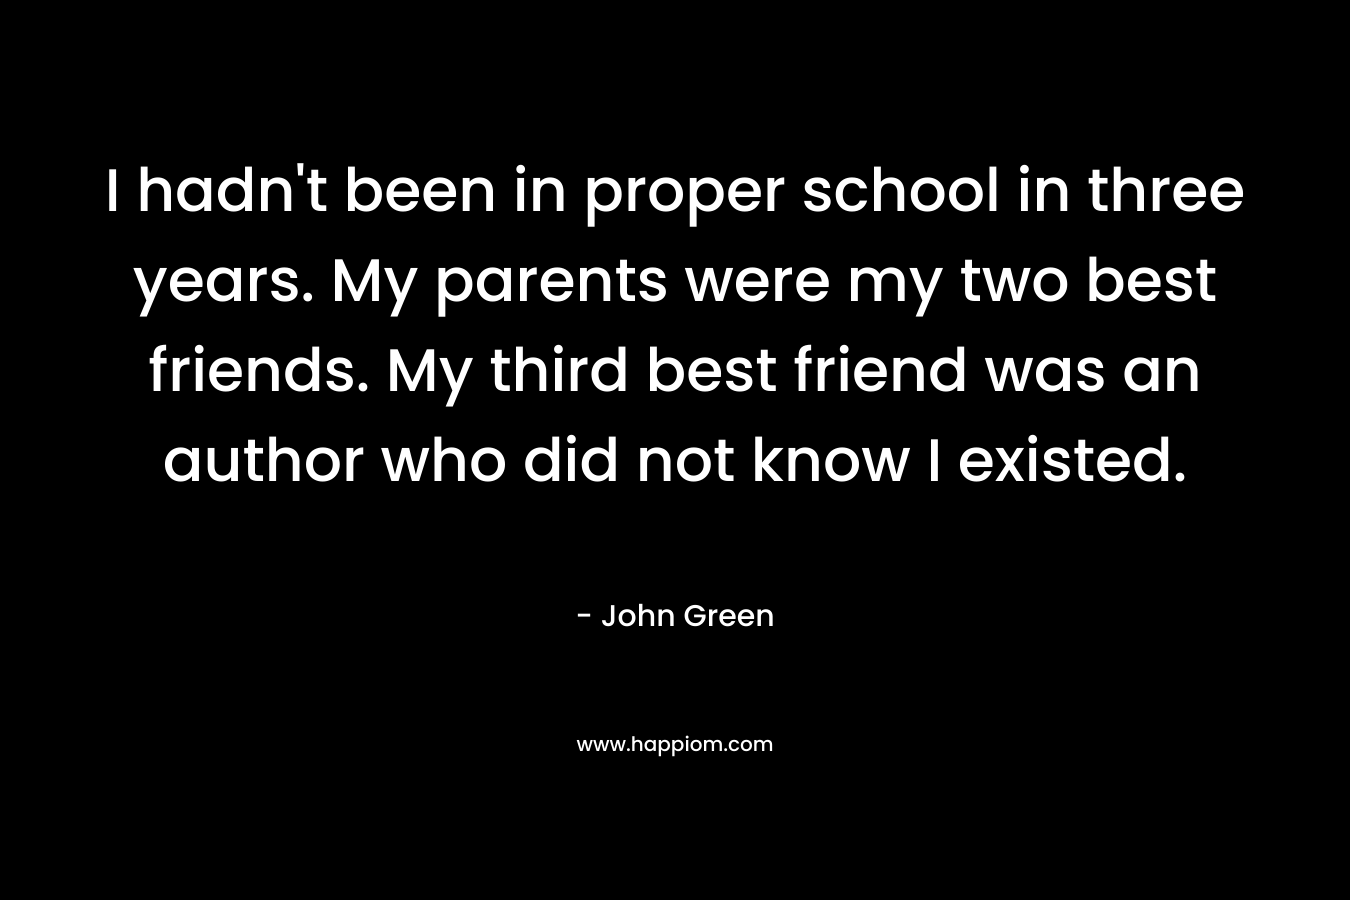 I hadn't been in proper school in three years. My parents were my two best friends. My third best friend was an author who did not know I existed.